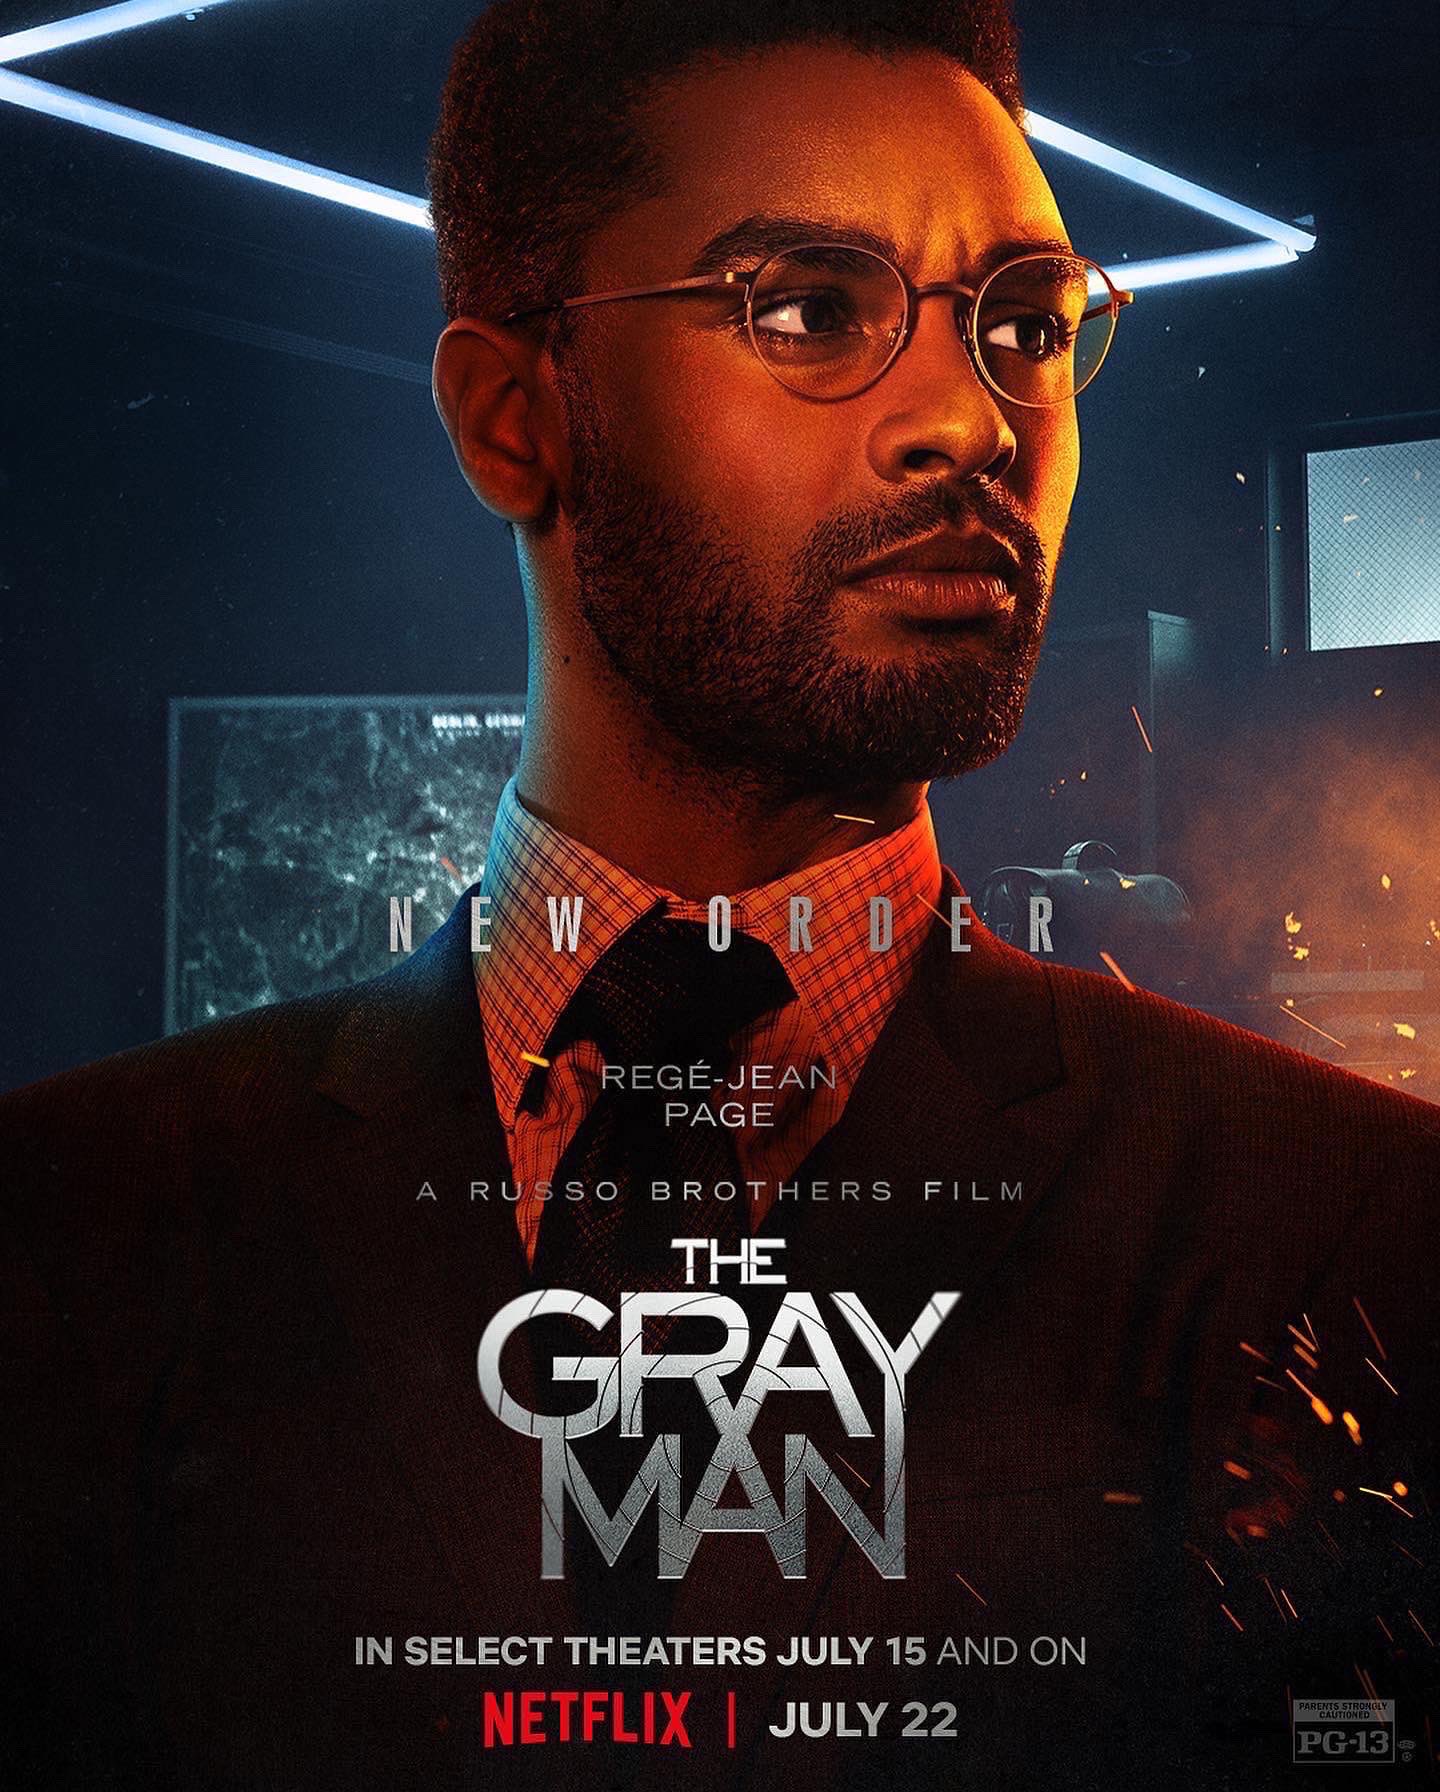 IMDb - Regé-Jean Page joins the cast of 'The Gray Man